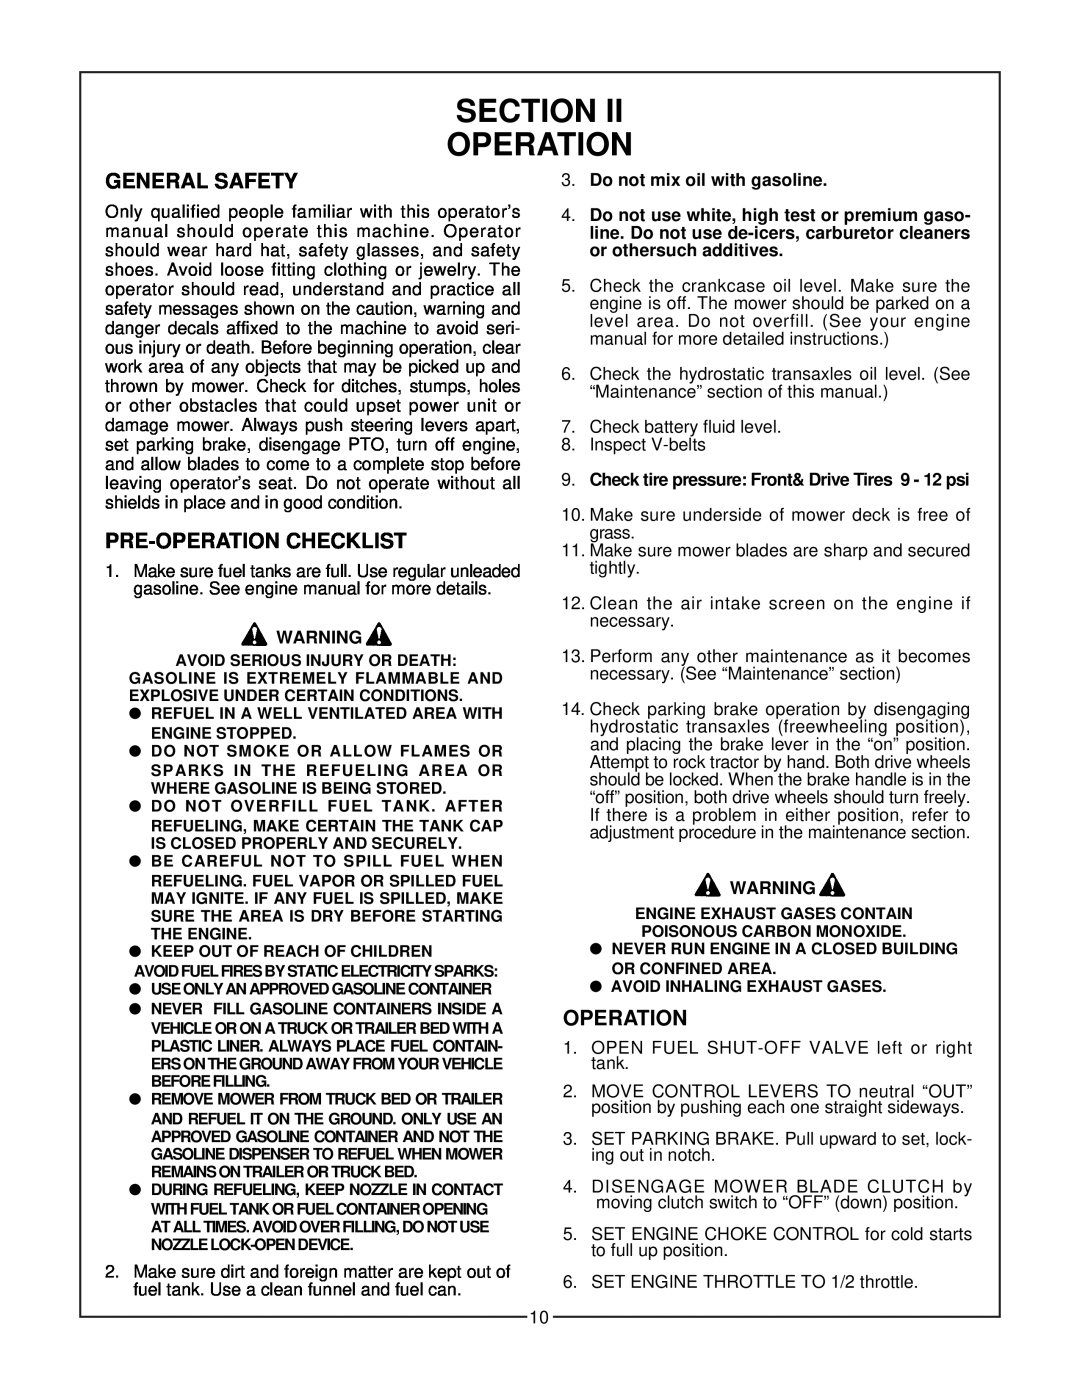 Bush Hog Estate Series manual Section Operation, General Safety, Pre-Operationchecklist, Do not mix oil with gasoline 